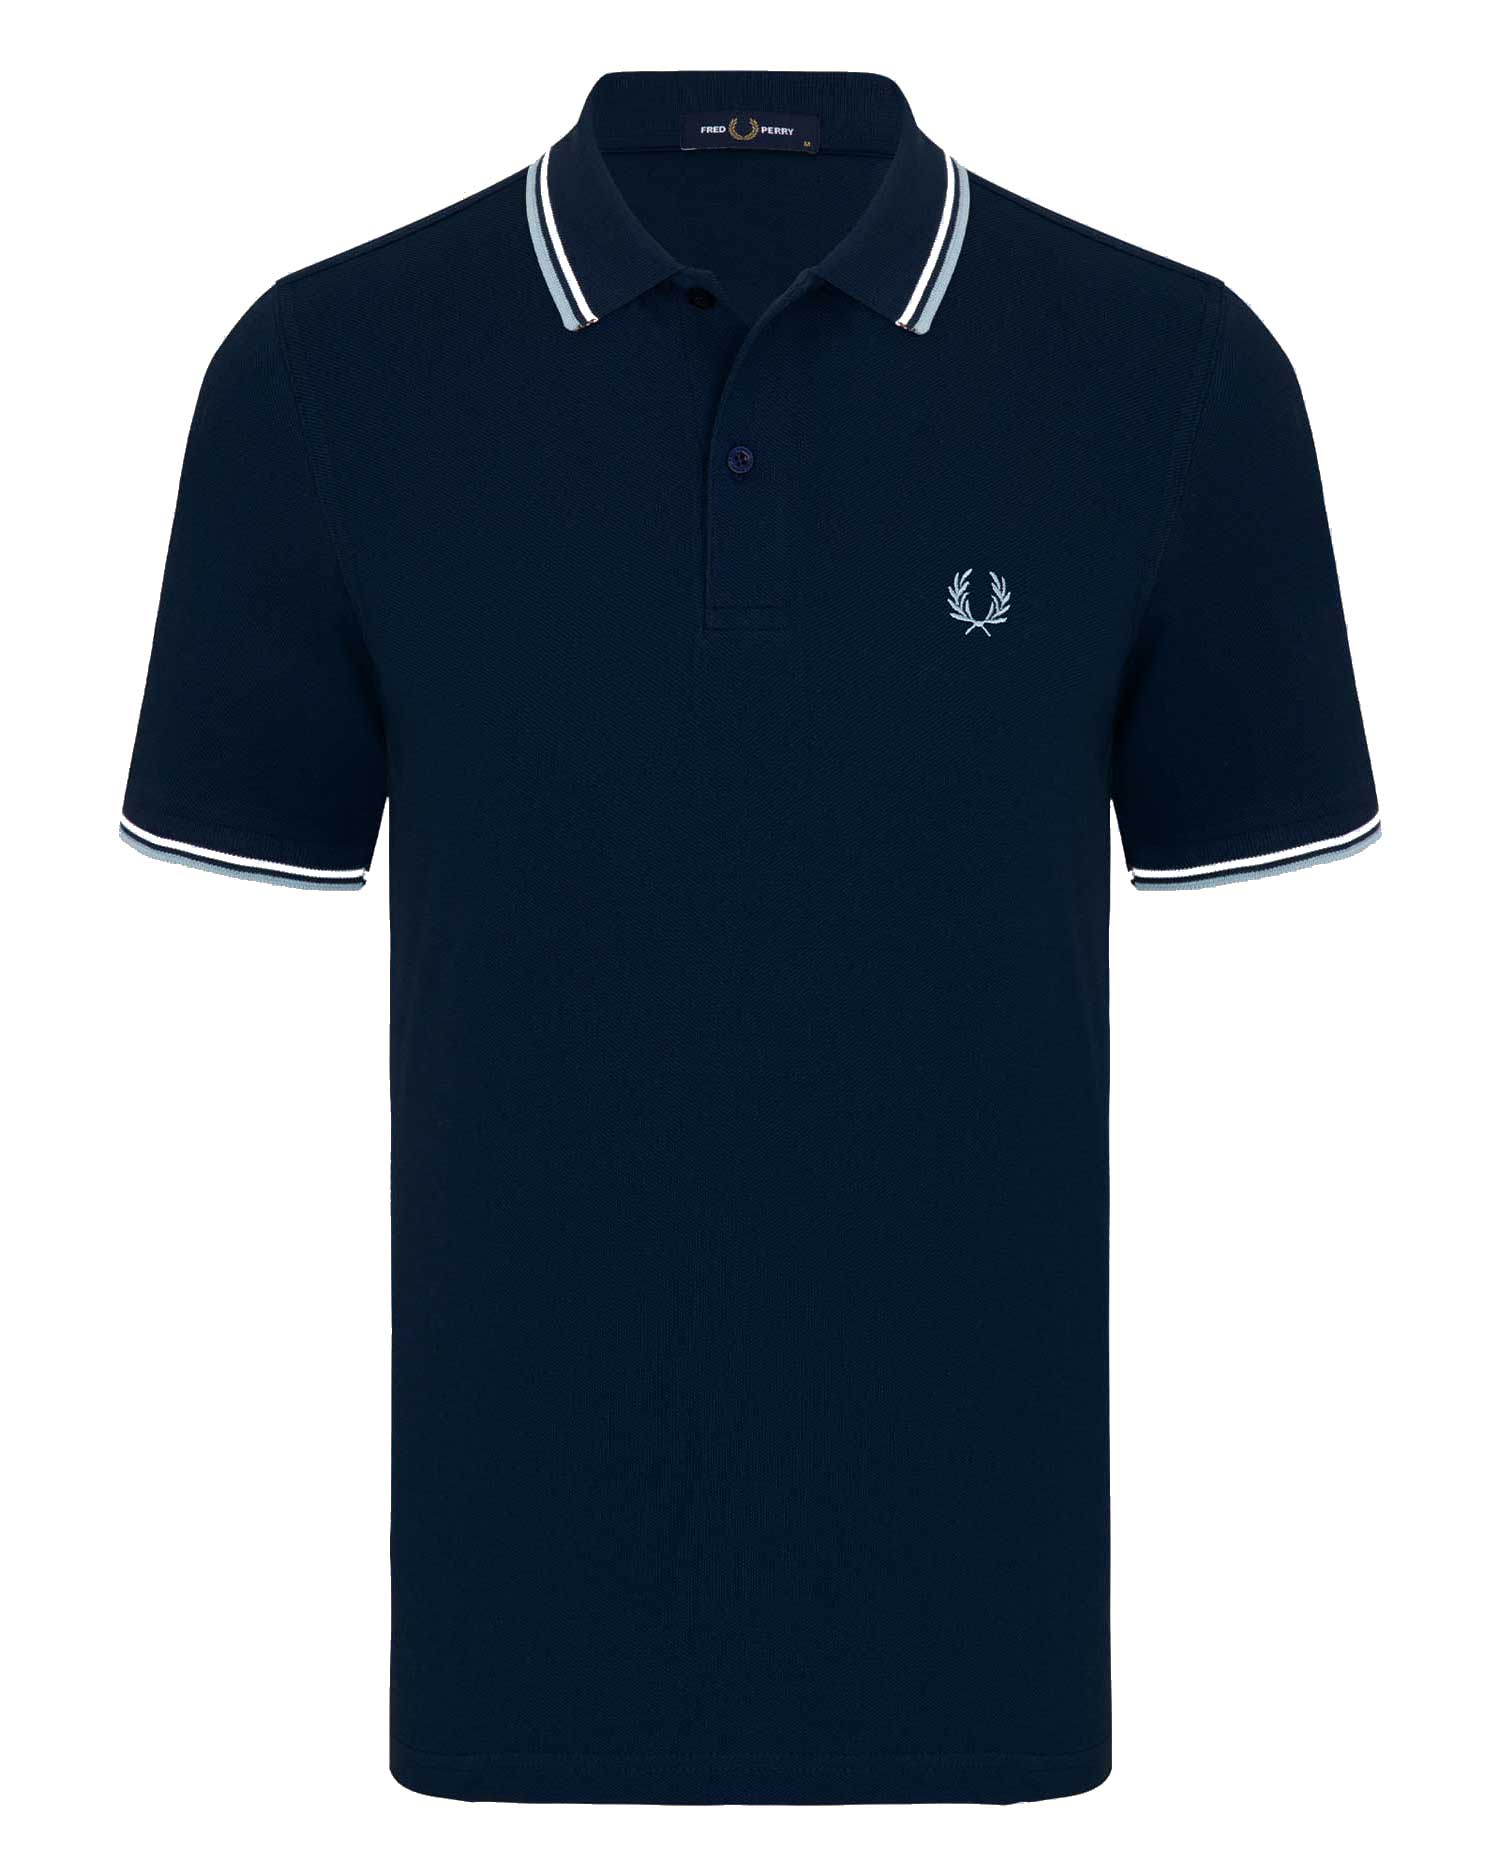 POLO FRED PERRY - NAVY/BLAUW